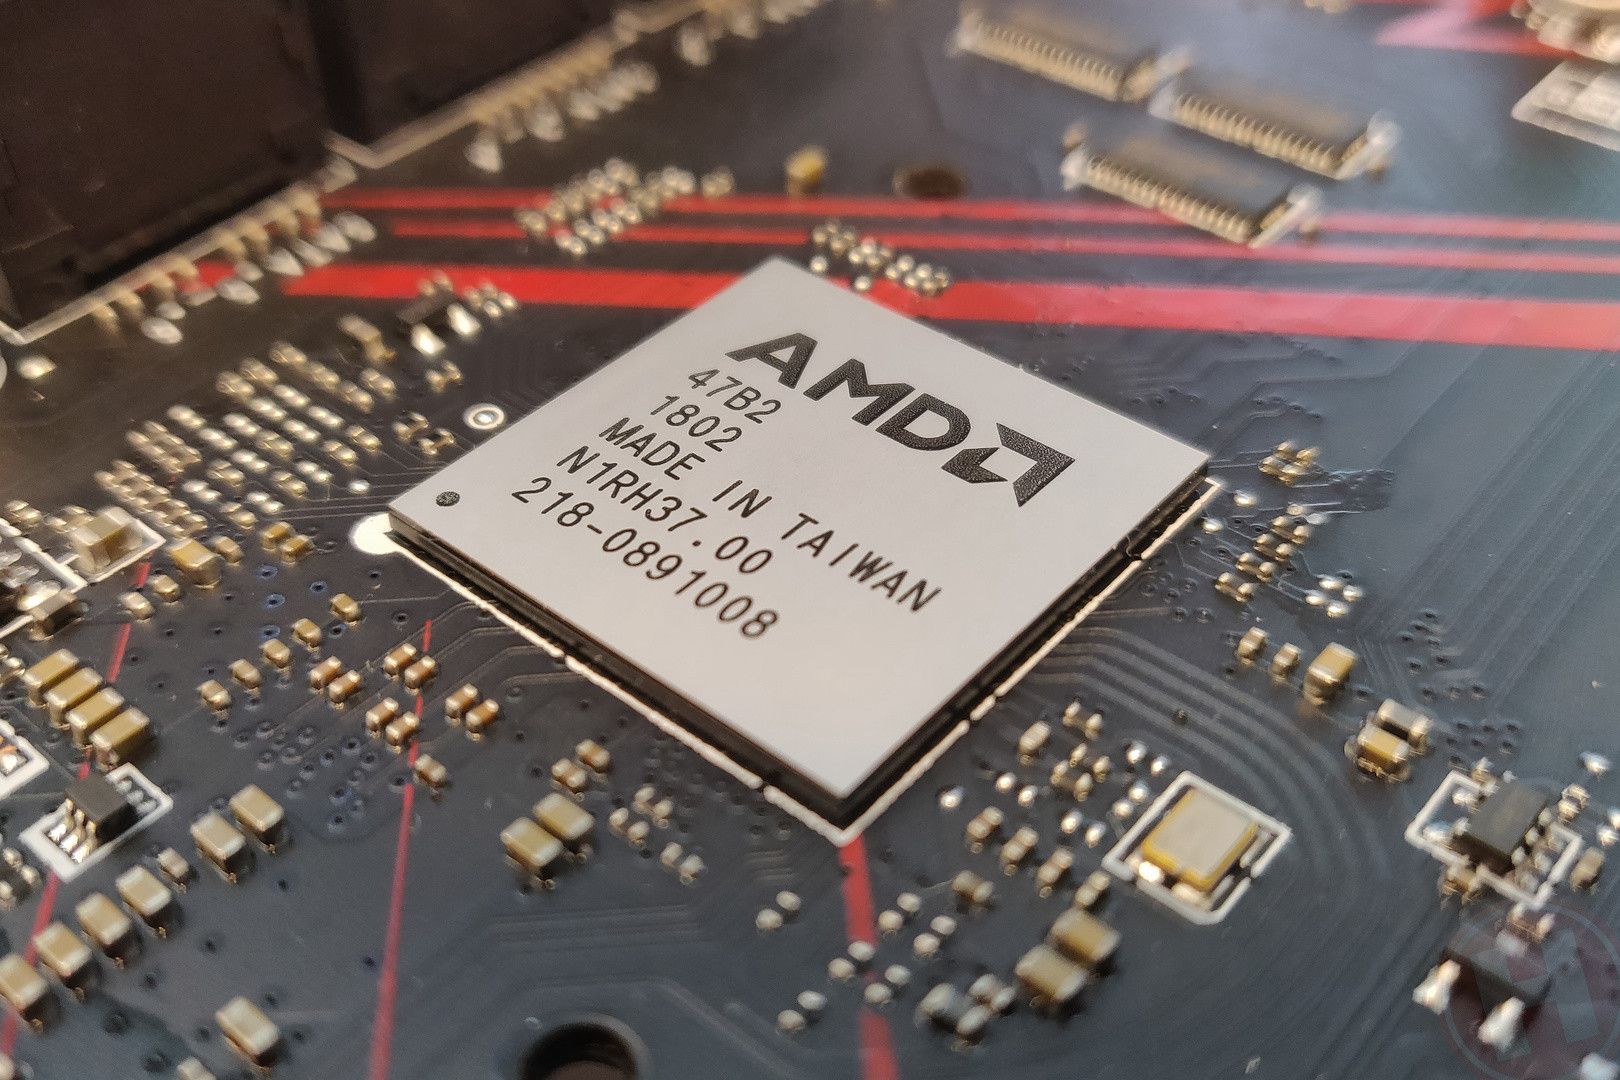 AMD Ryzen 3000 voltage problems attributed to a poor test tool by red team